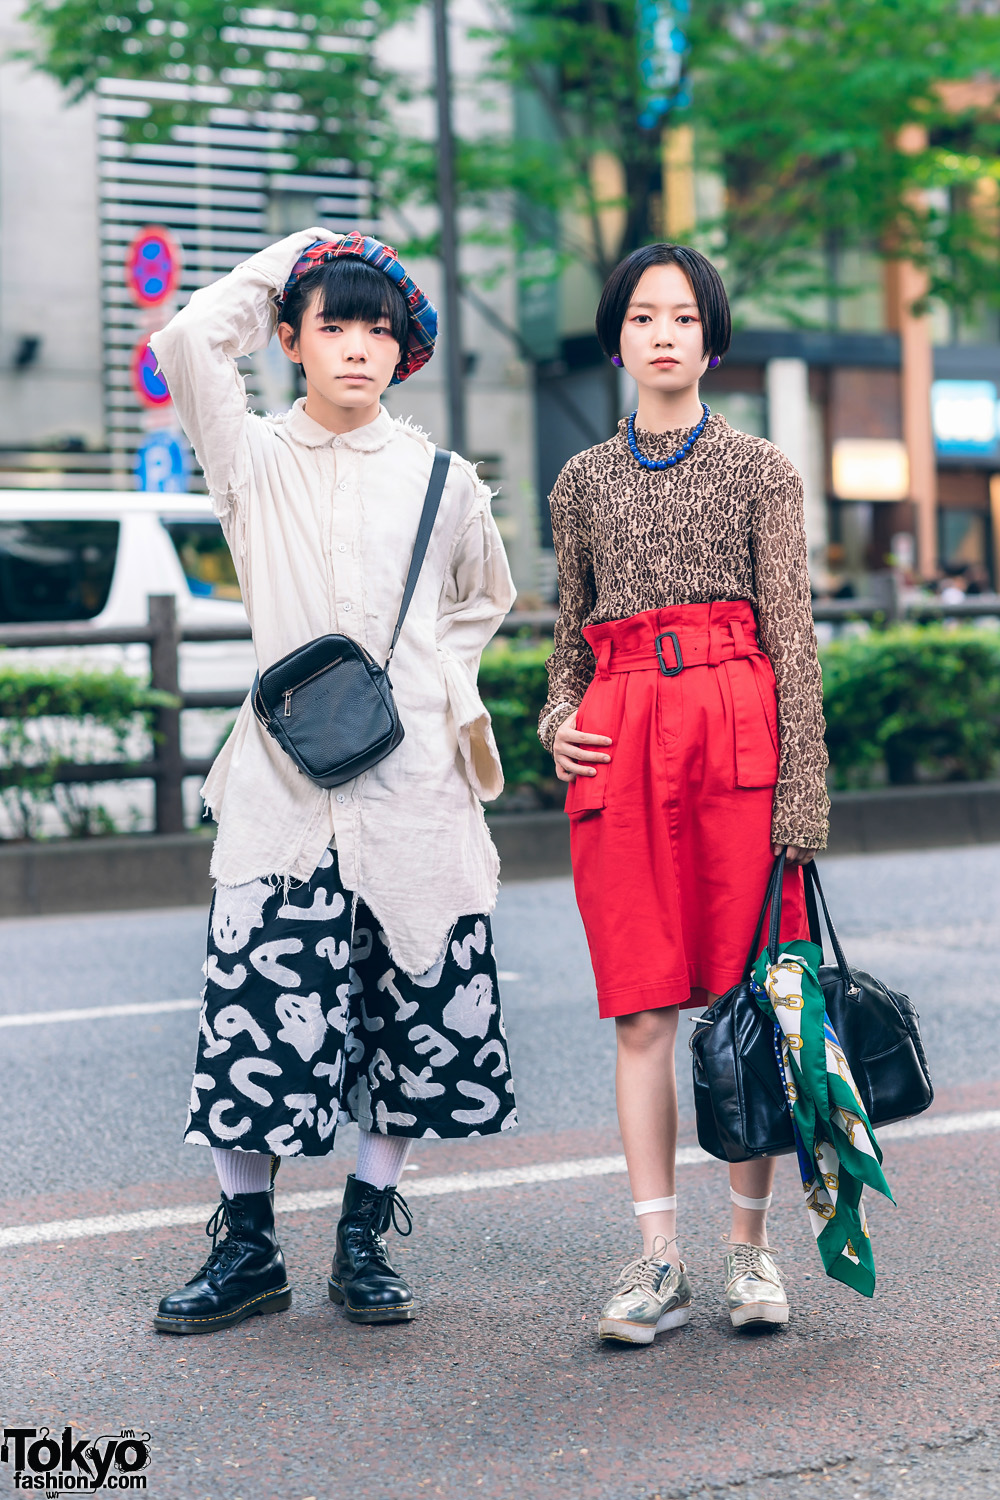 Japanese Streetwear Styles w/ HEIHEI Plaid Beret, HEIHEI Deconstructed Shirt, The Four-Eyed Lace Top & Vivienne Westwood